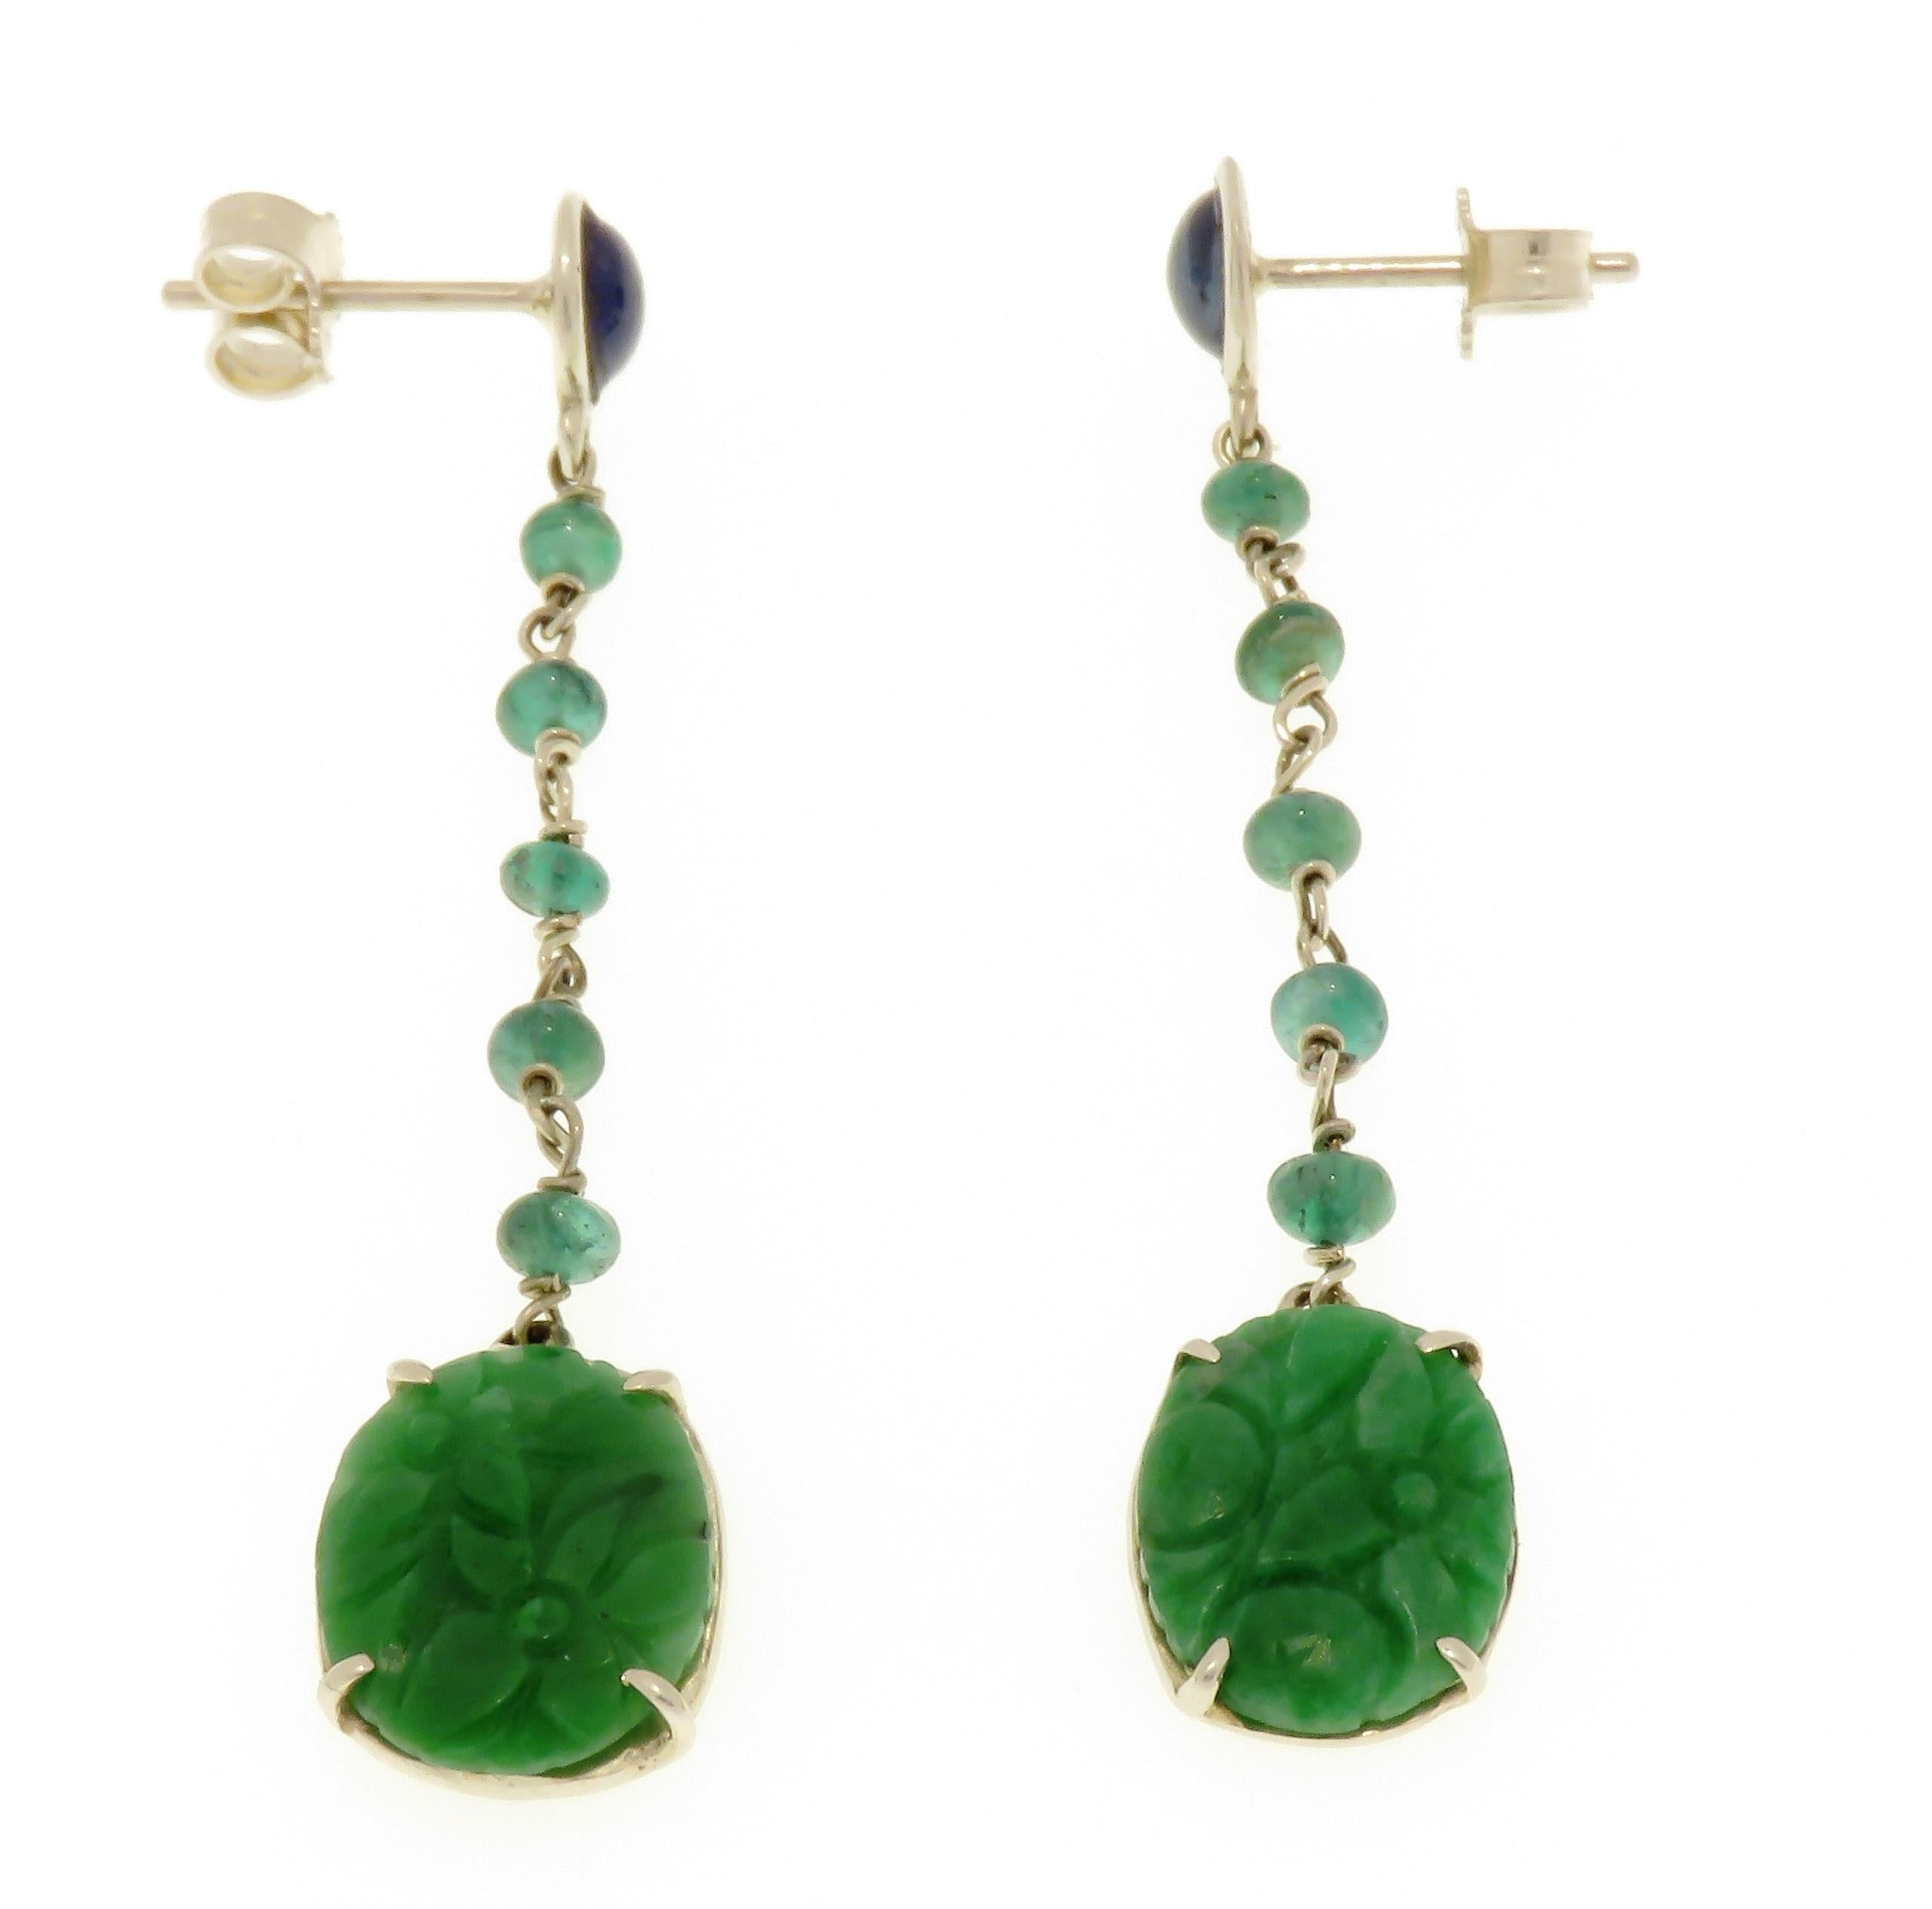 Contemporary Jade Sapphires Emeralds 9 Karat White Gold Dangle Earrings Handcrafted in Italy